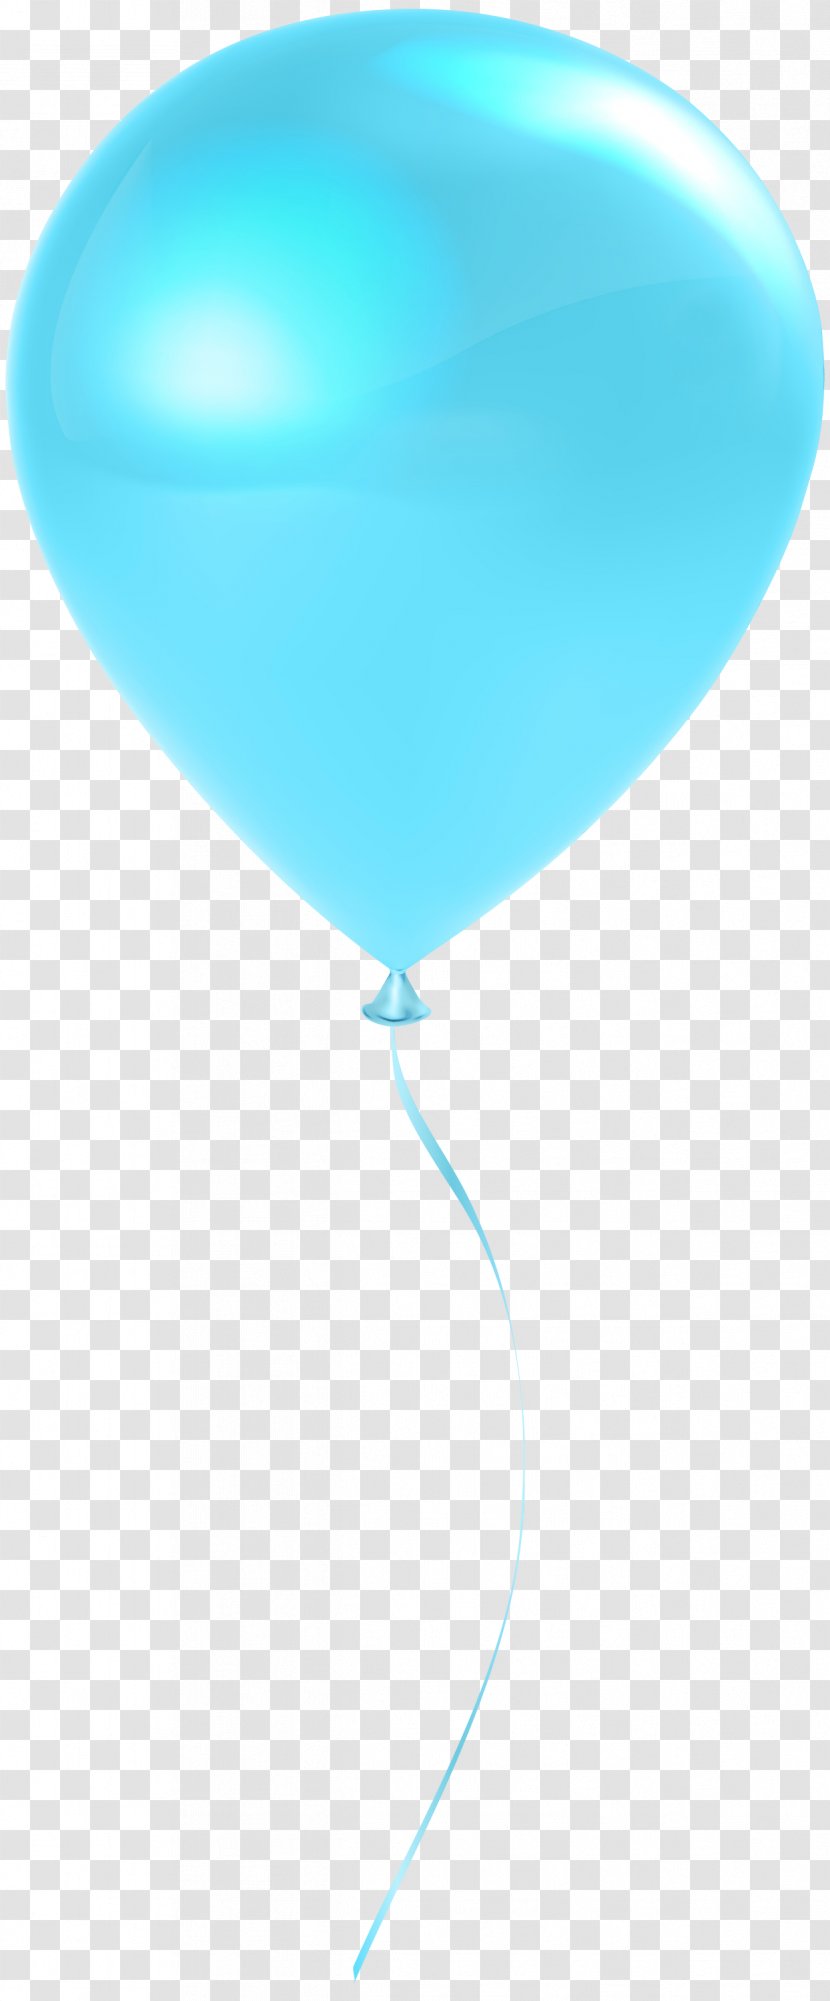 Watercolor Balloons - Turquoise - Party Supply Teal Transparent PNG